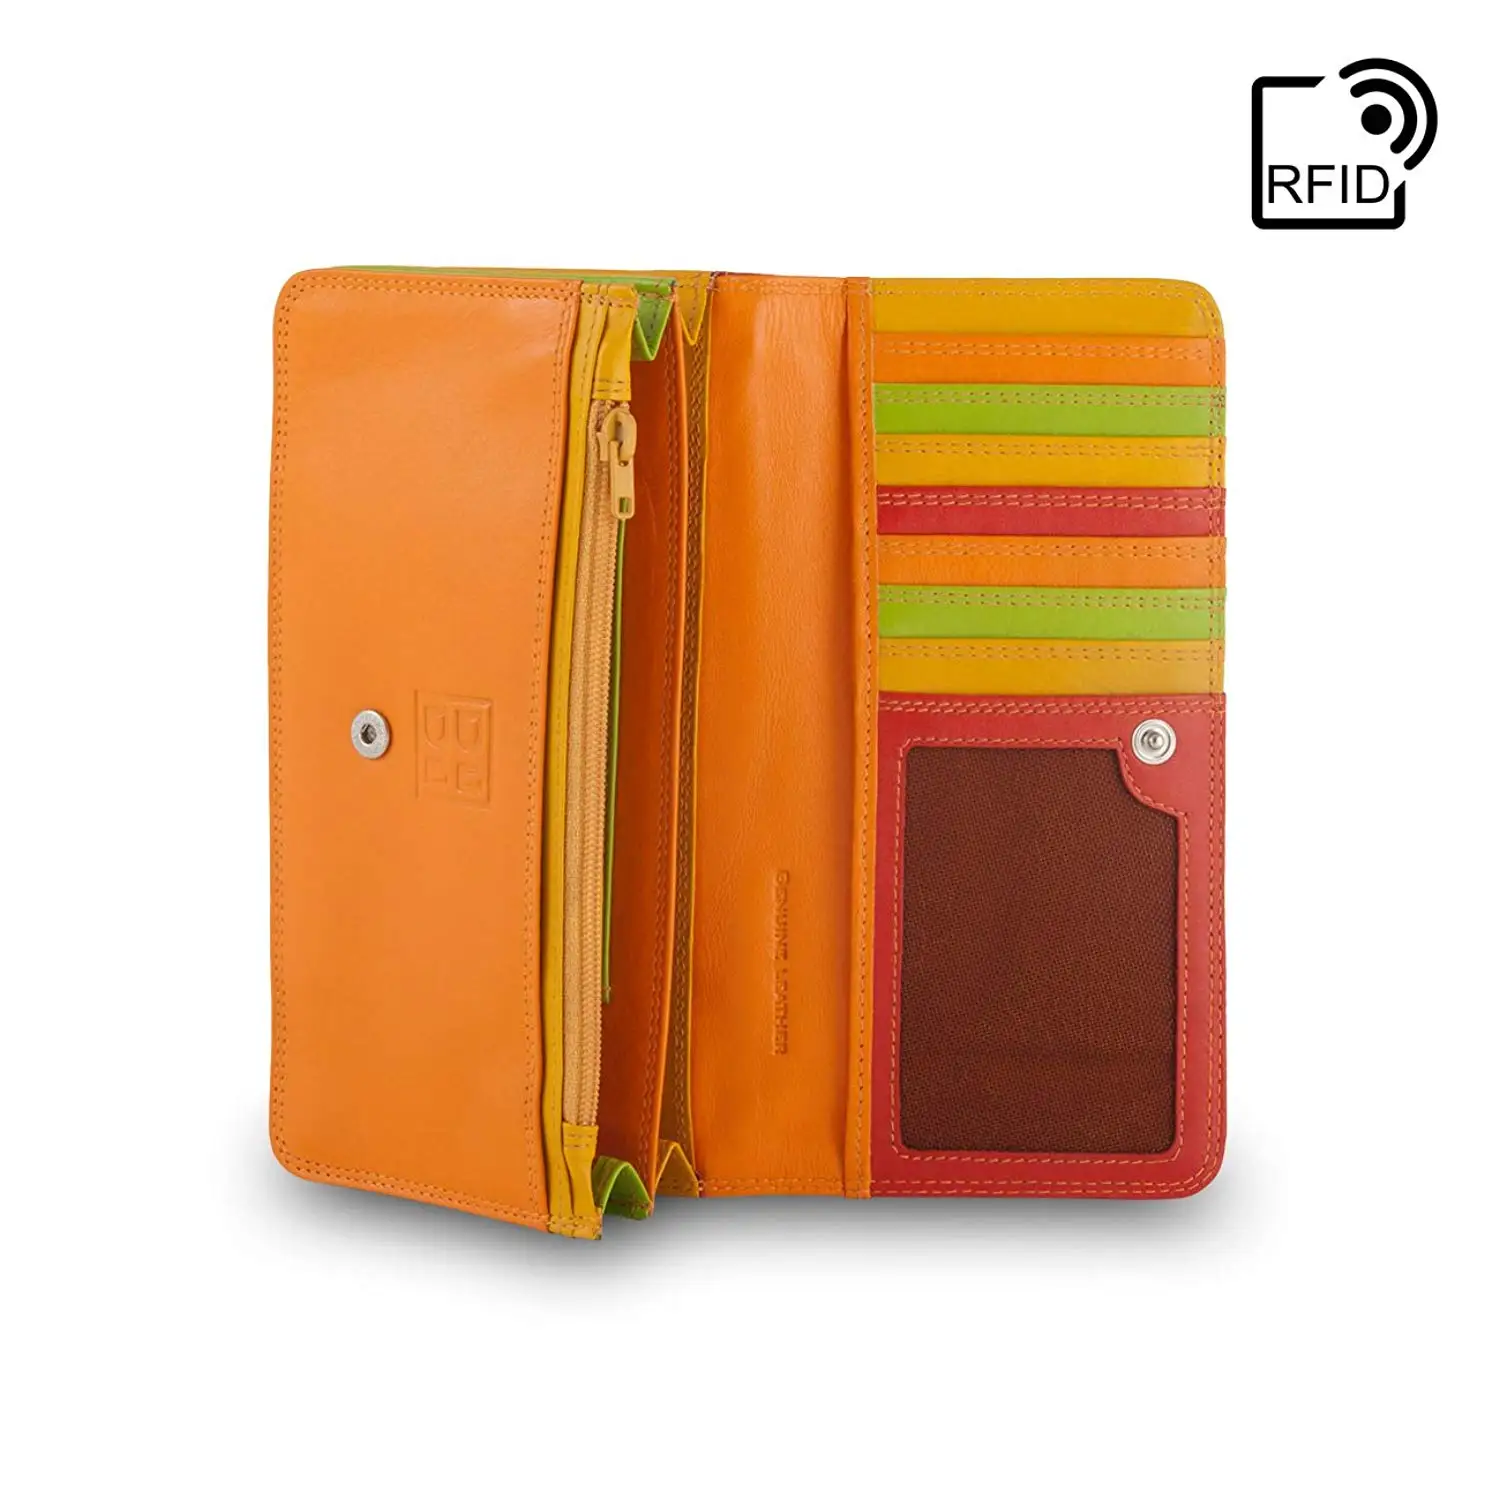 Buy DUDU RFID Blocking Womens Leather Purse Ladies Wallet Multicolor with Coin pocket and Snap ...